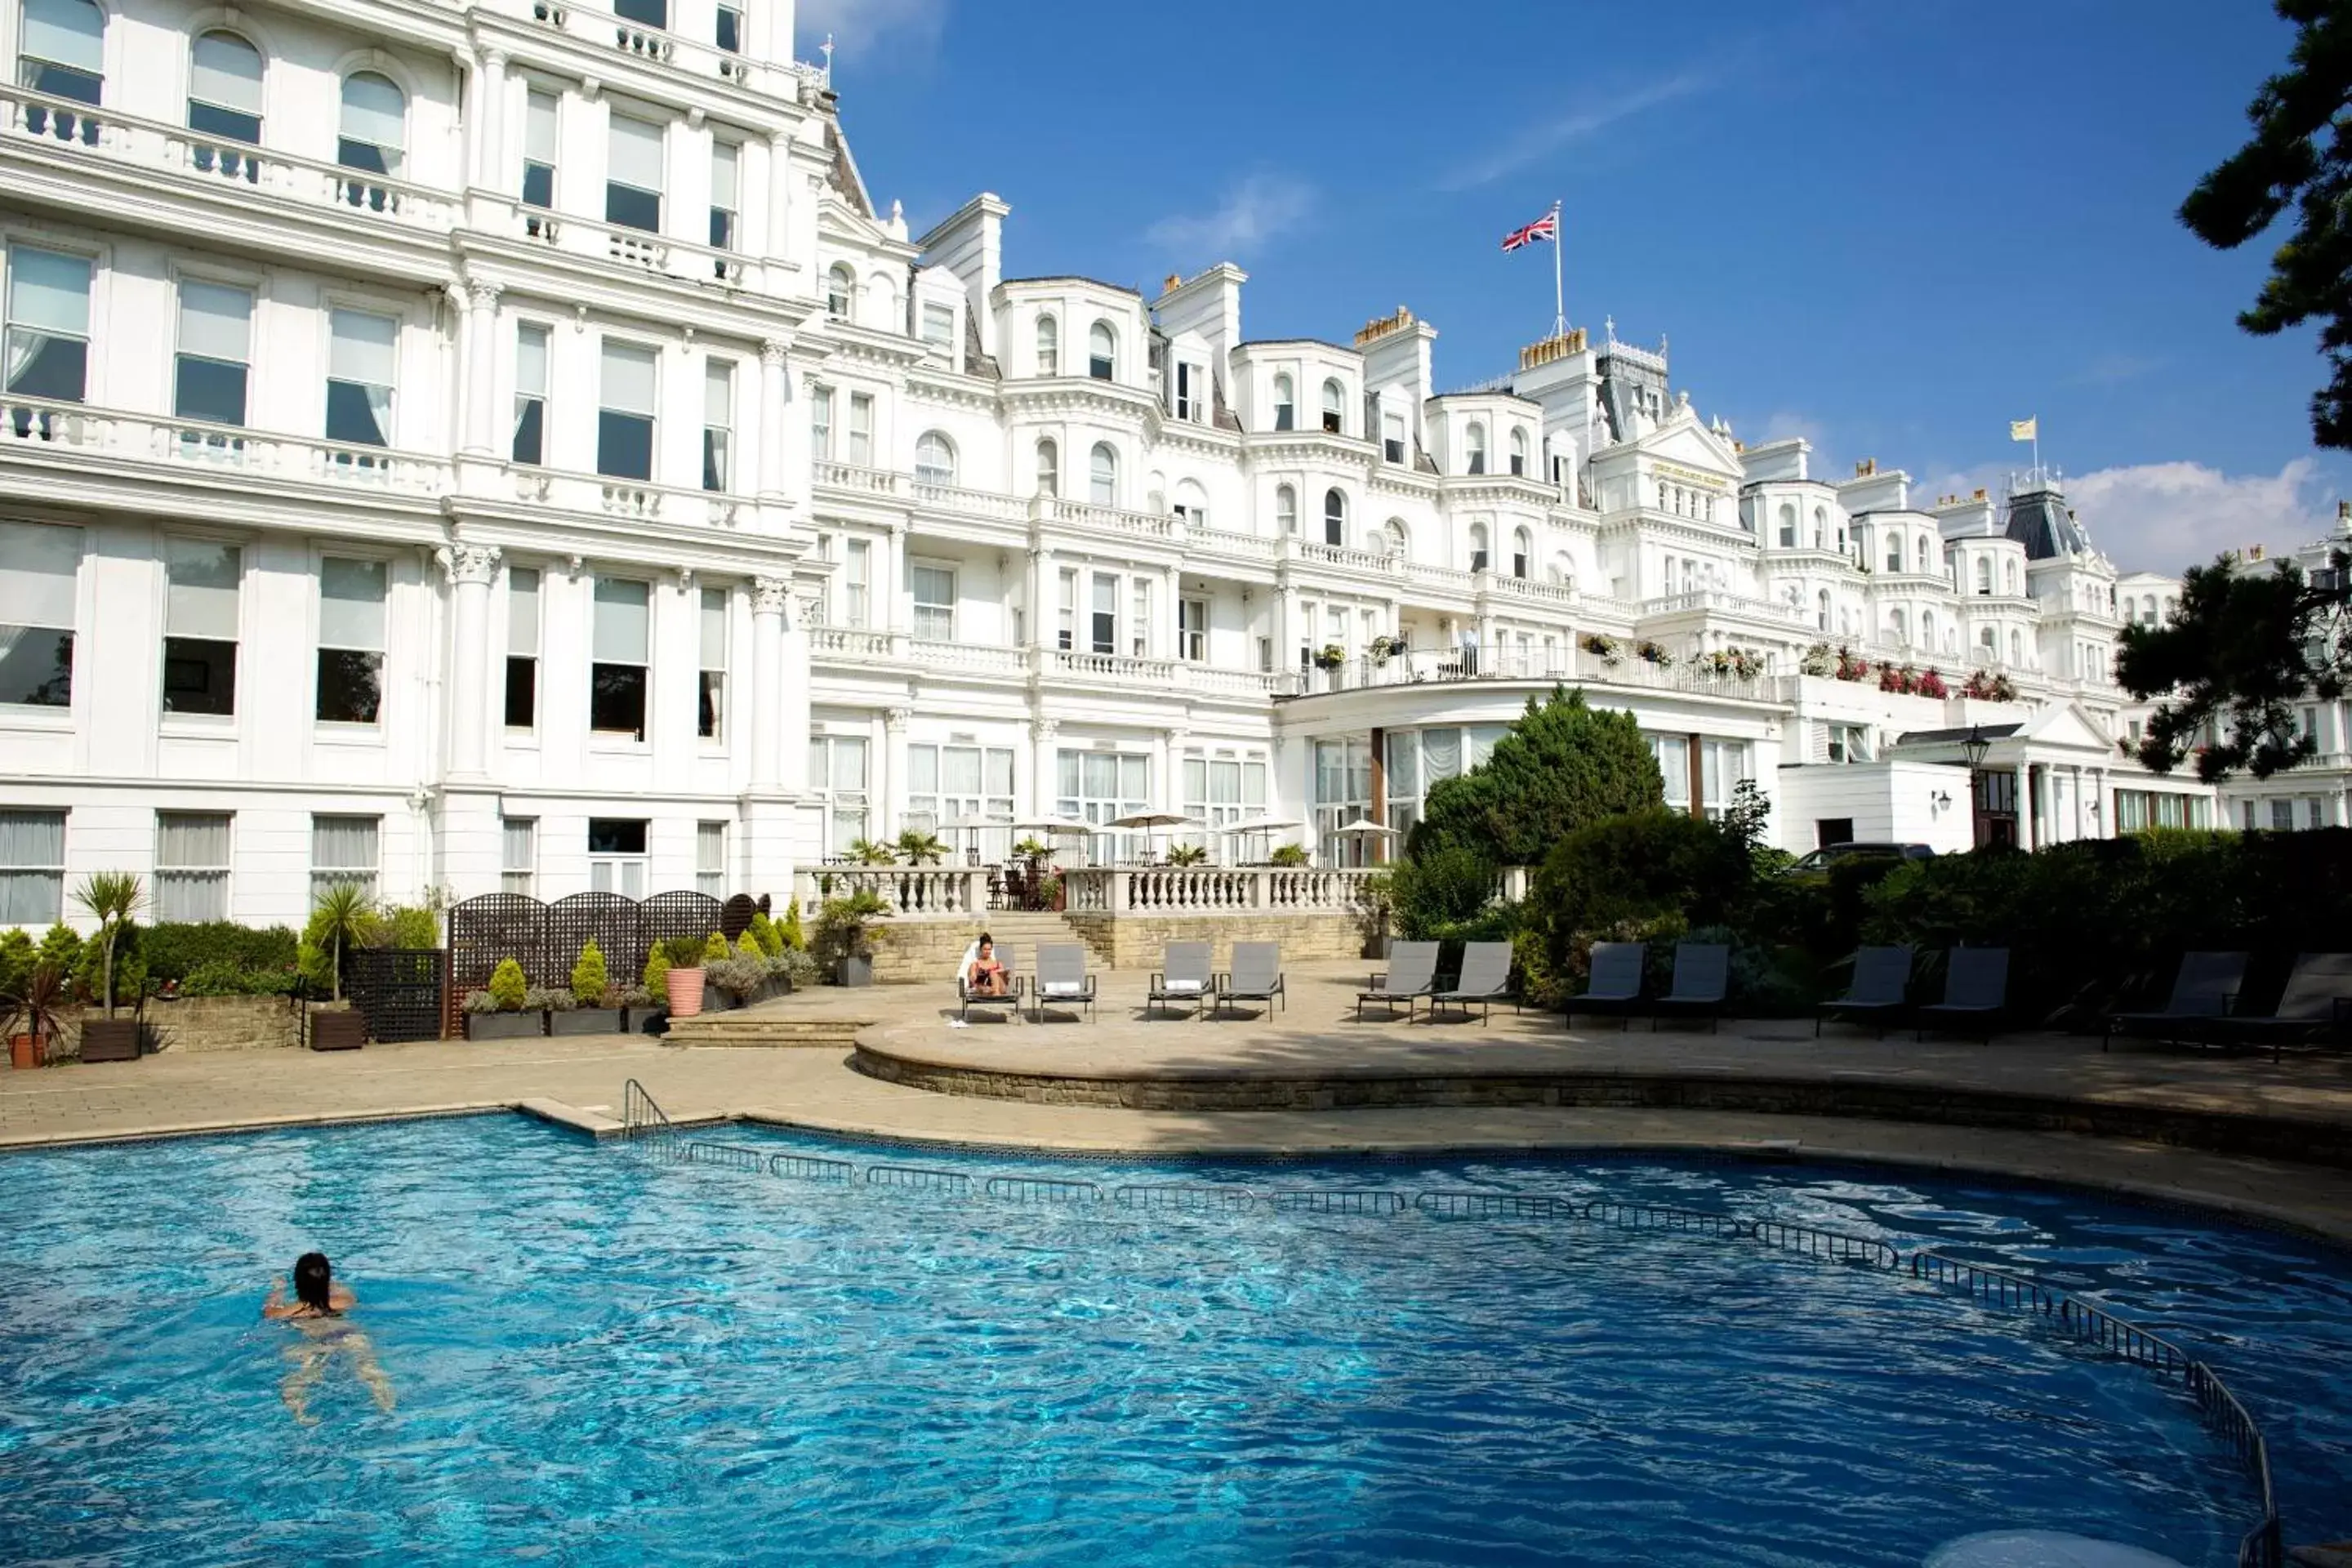 Swimming Pool in The Grand Hotel